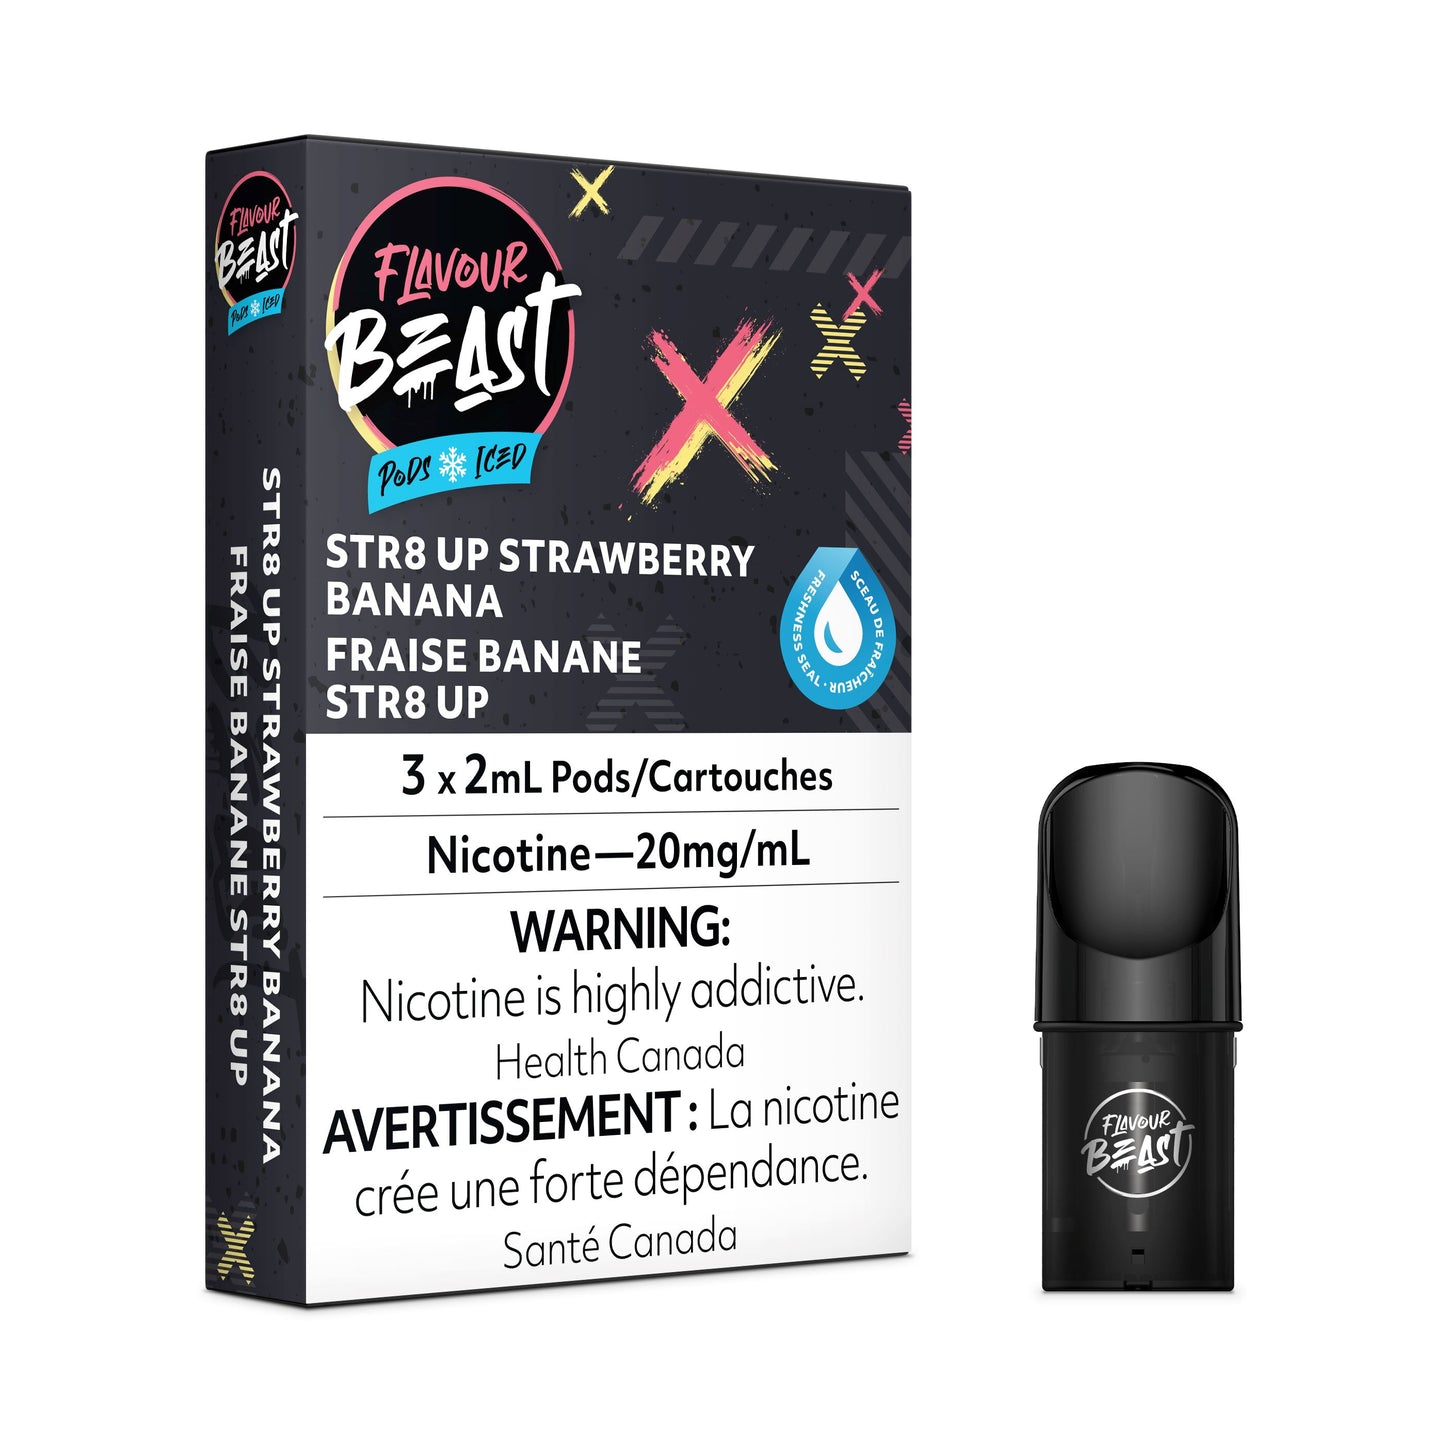 Str8 Up Strawberry Banana Iced - FB CLOSED PODS Flavour Beast Flow 